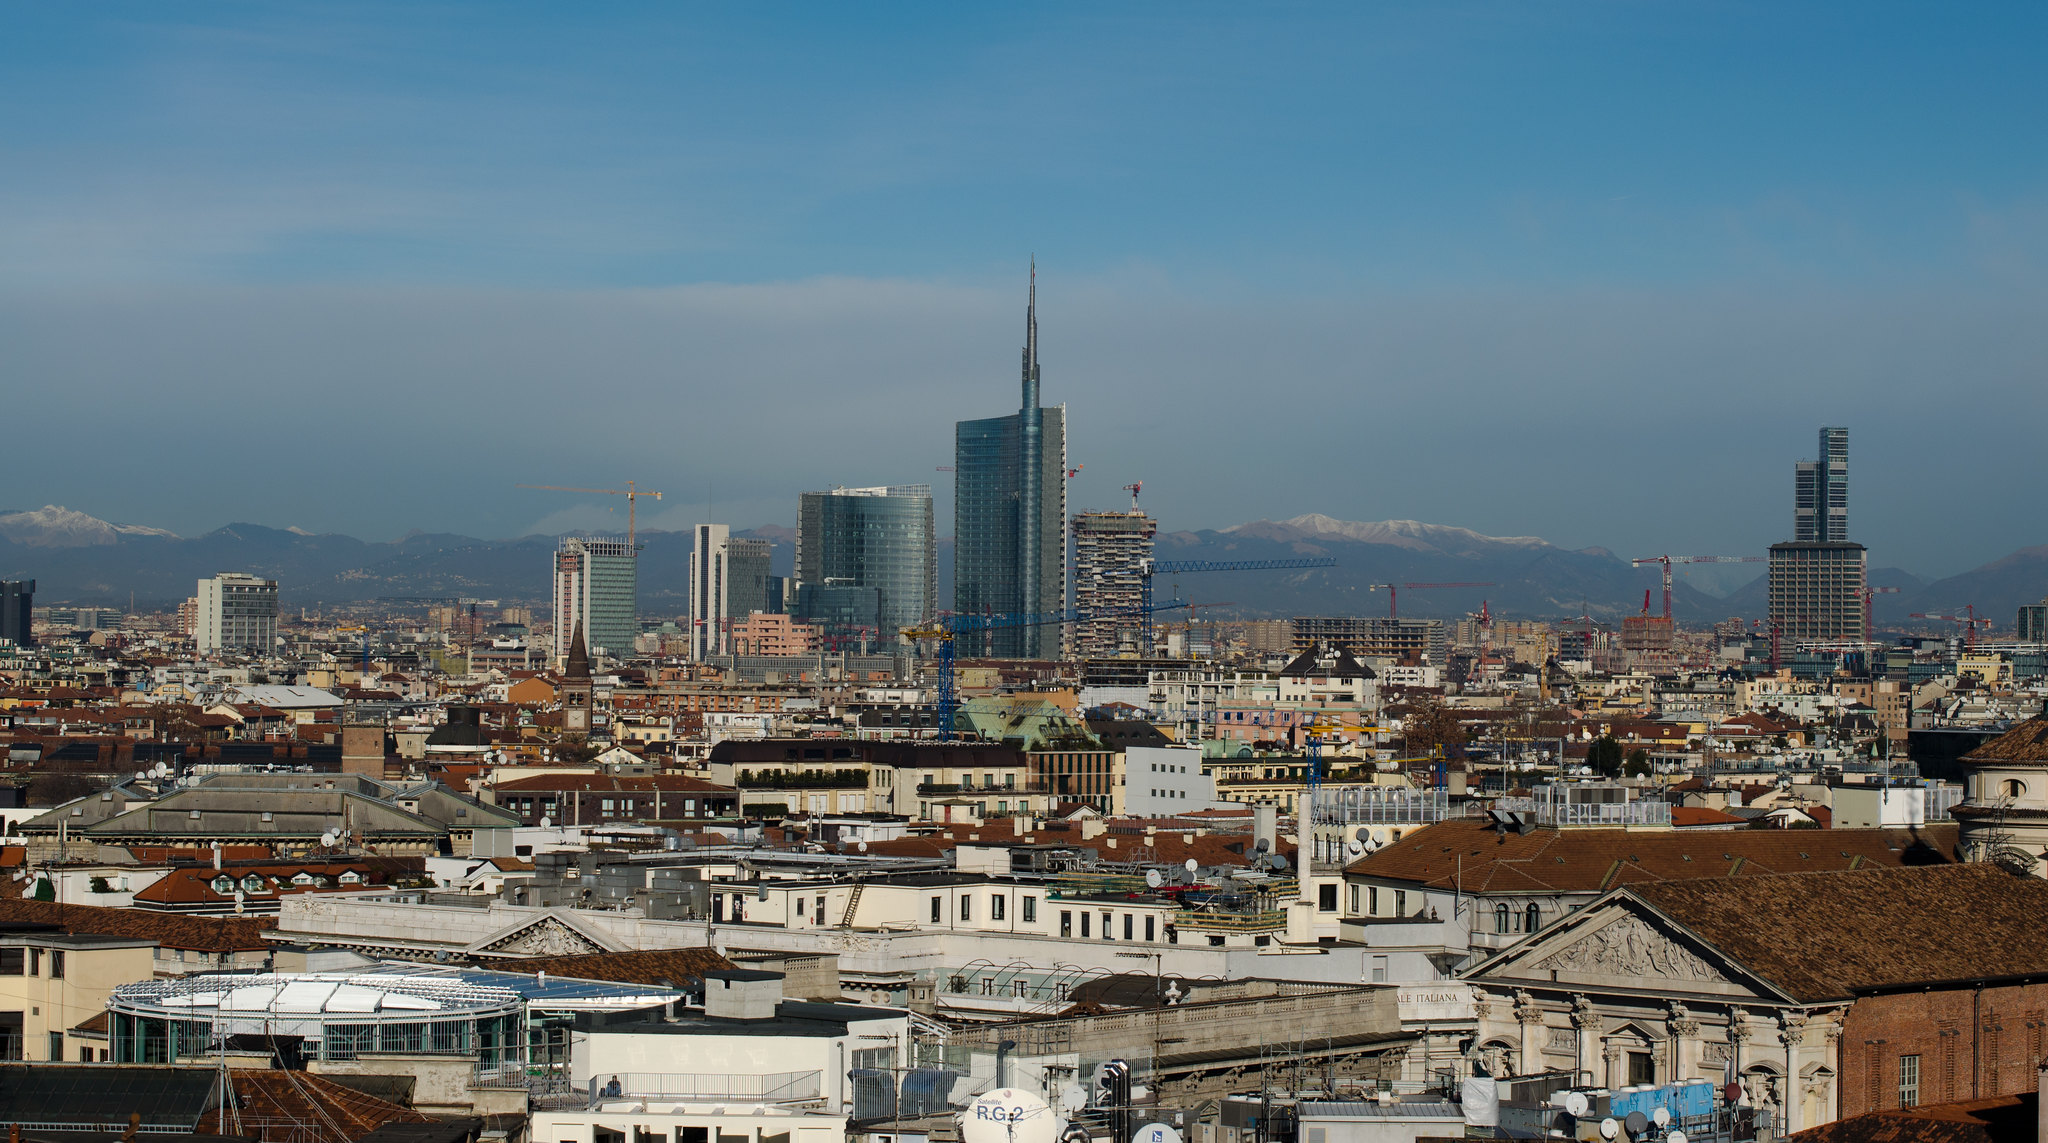 The skyline of Milan, Italy, showing flat historical buildings against towers